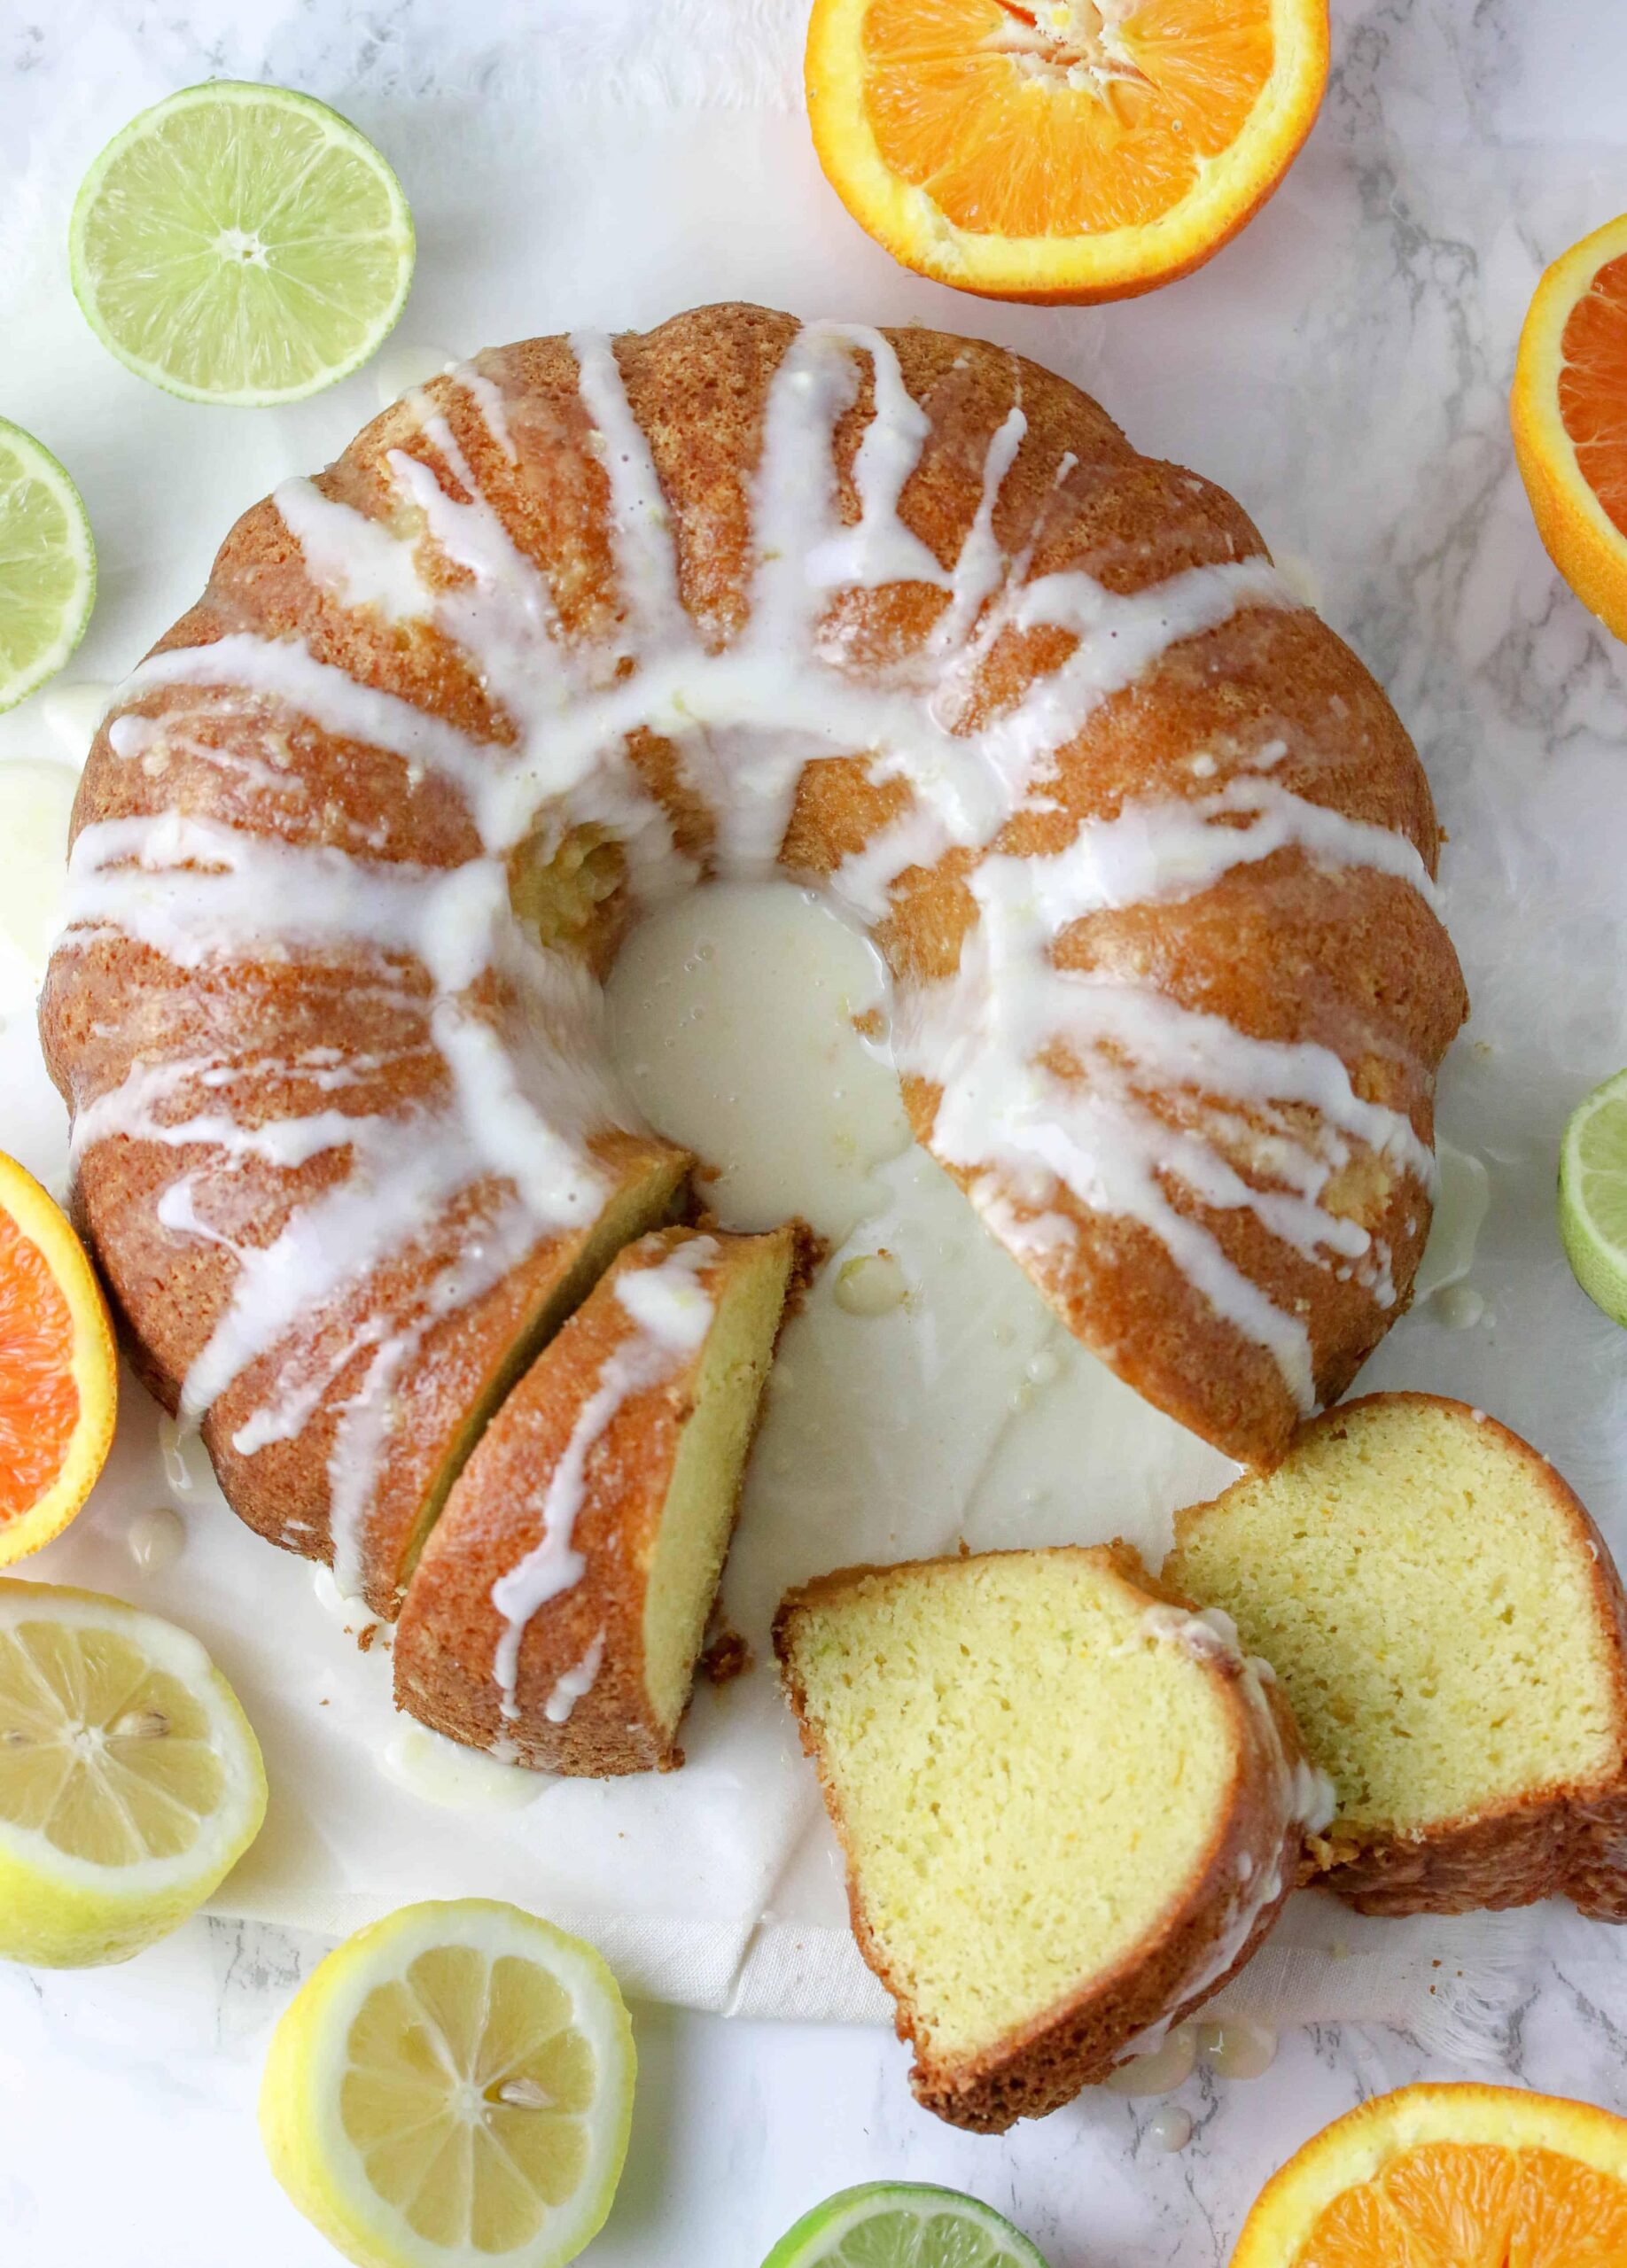  Topped with a fresh squeeze of lemon for a burst of flavor.